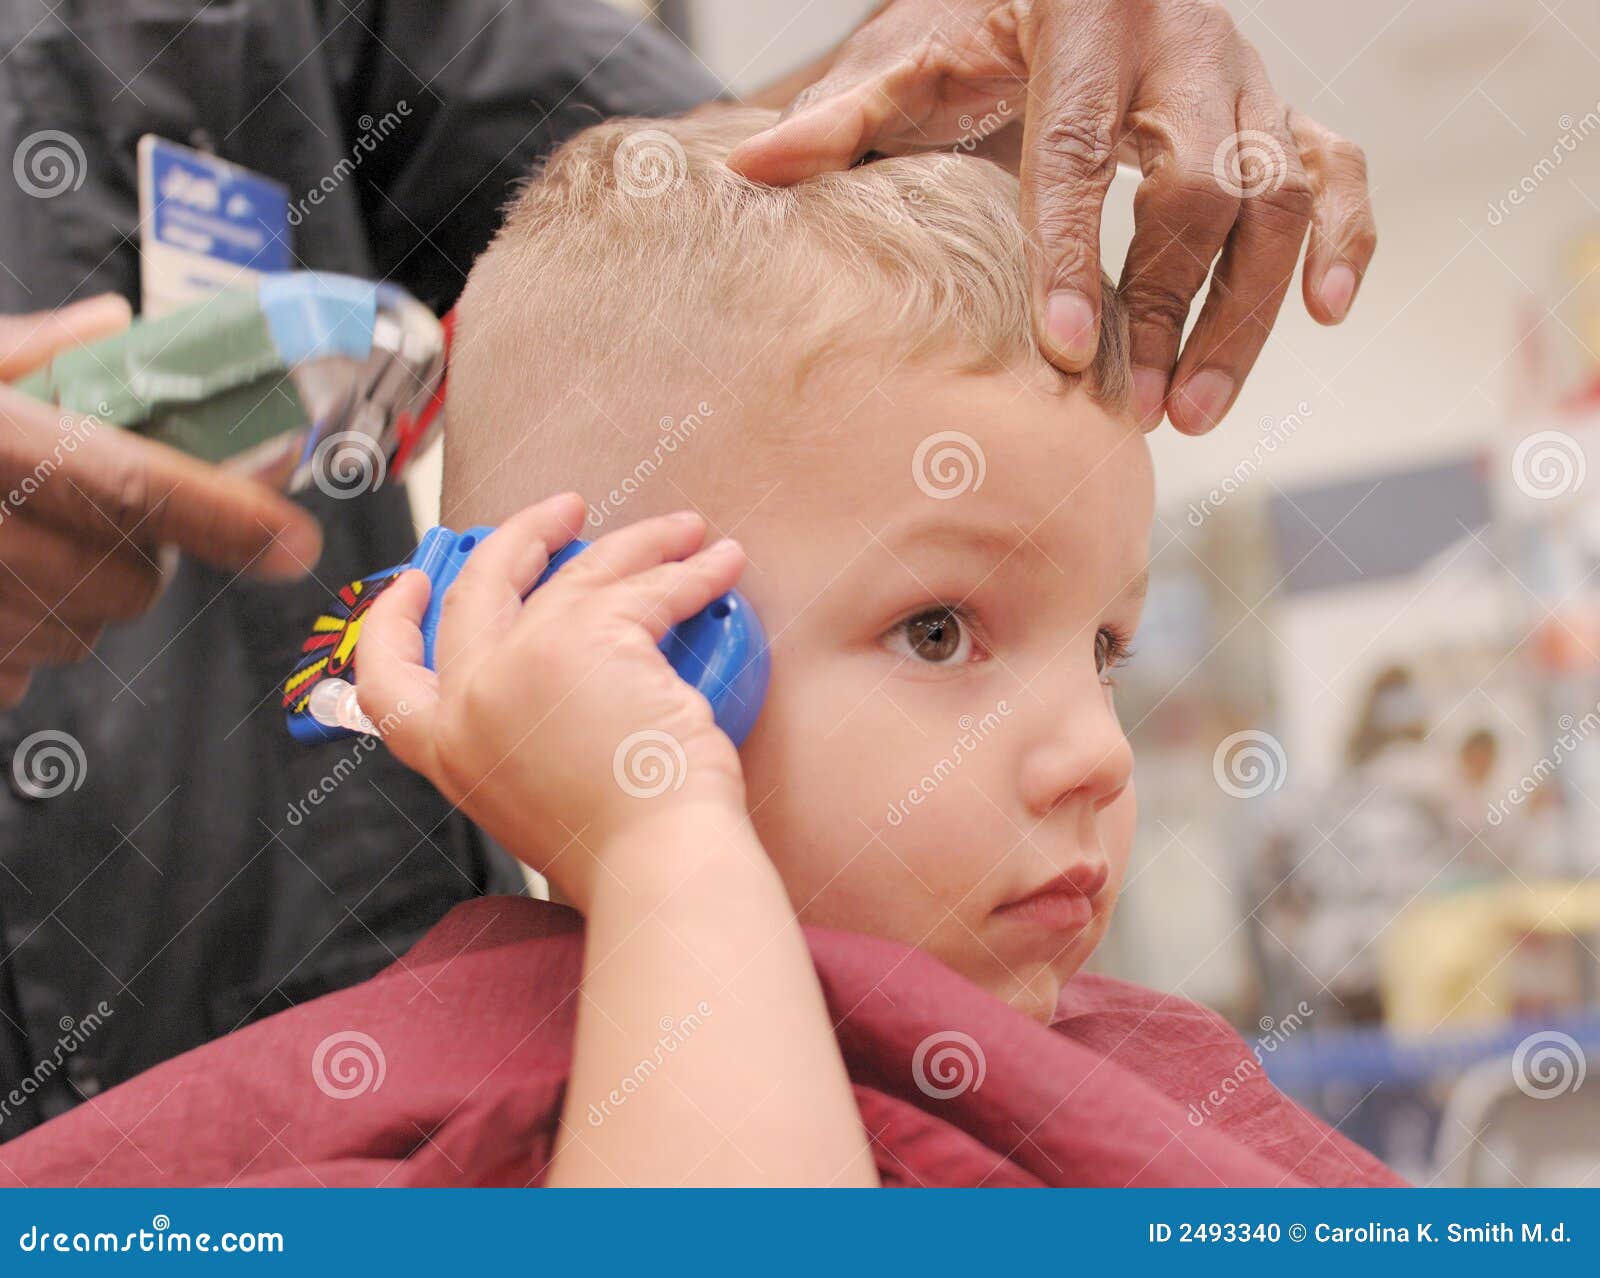 Toddler Boy Getting Haircut Stock Photo Image Of Occupation